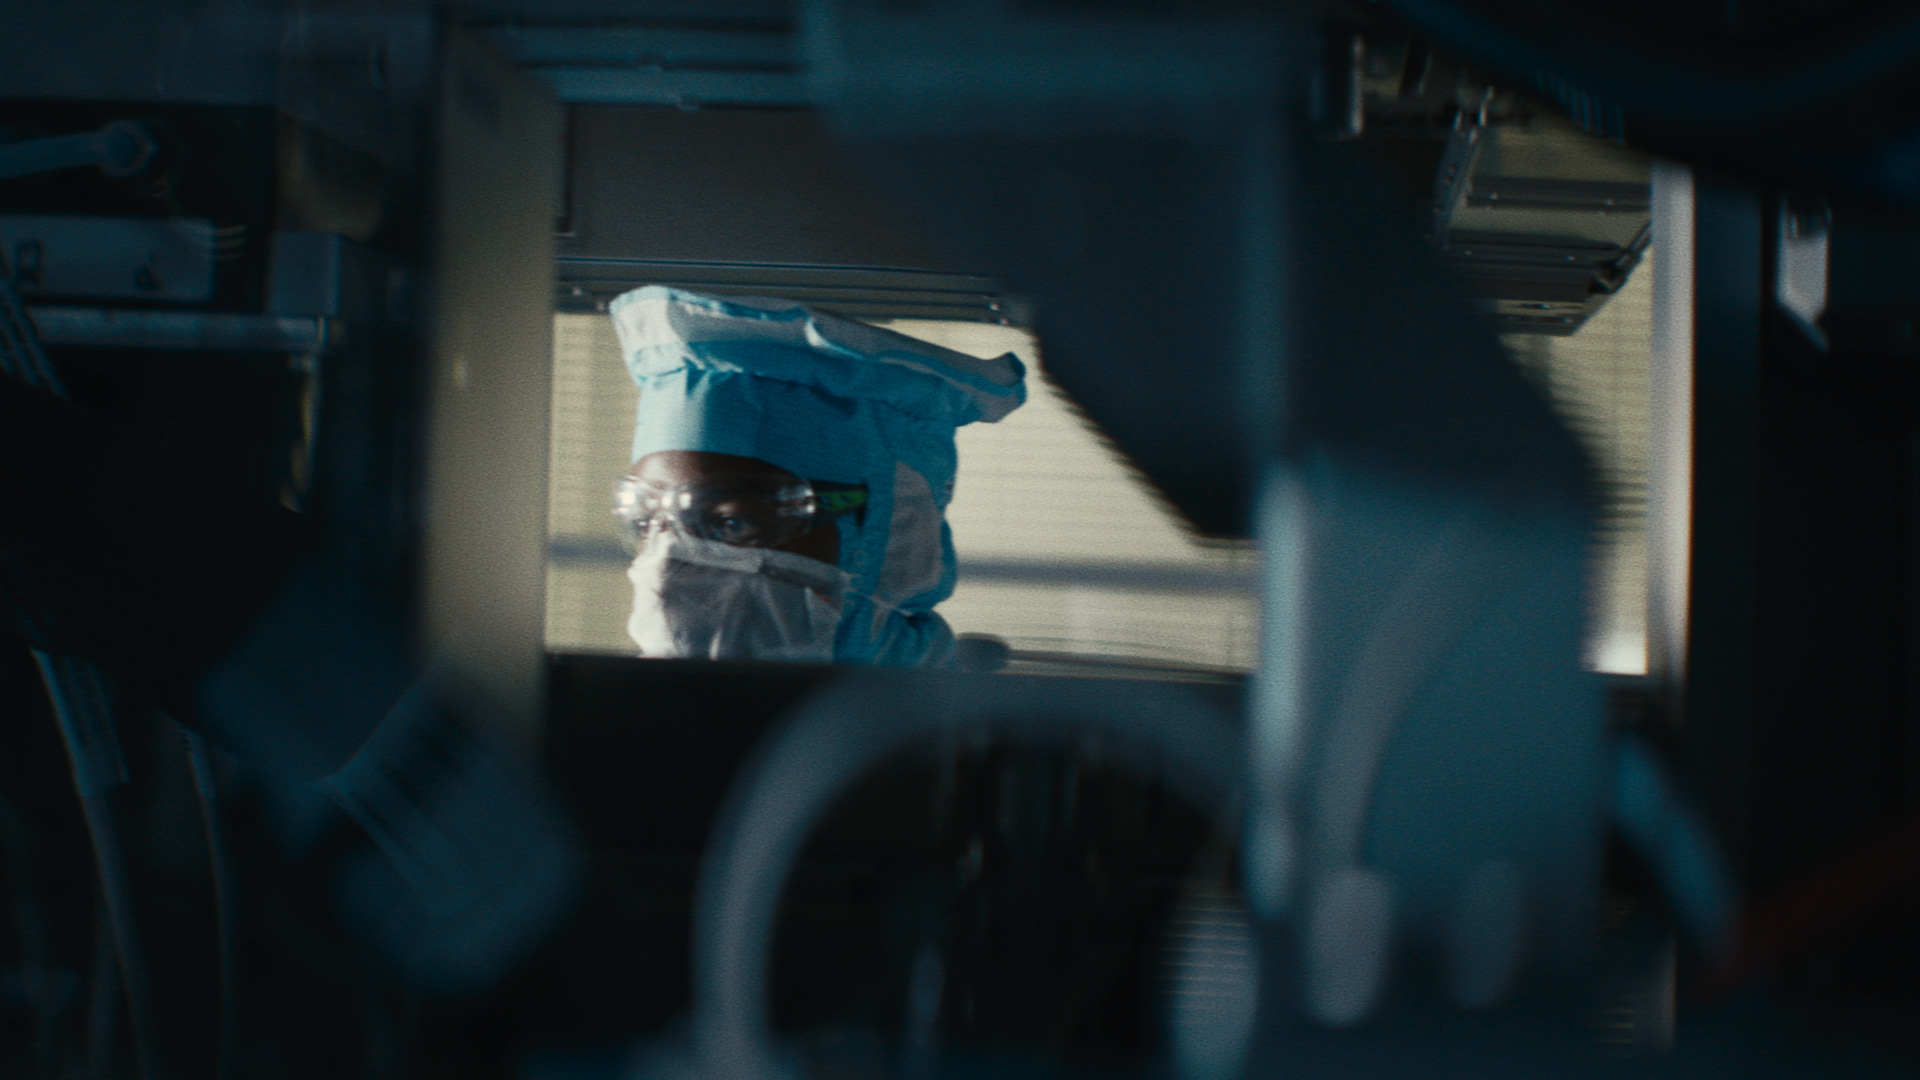 The camera looks through a machine to see the face of a man wearing a cleanroom suit, a mask and safety goggles.